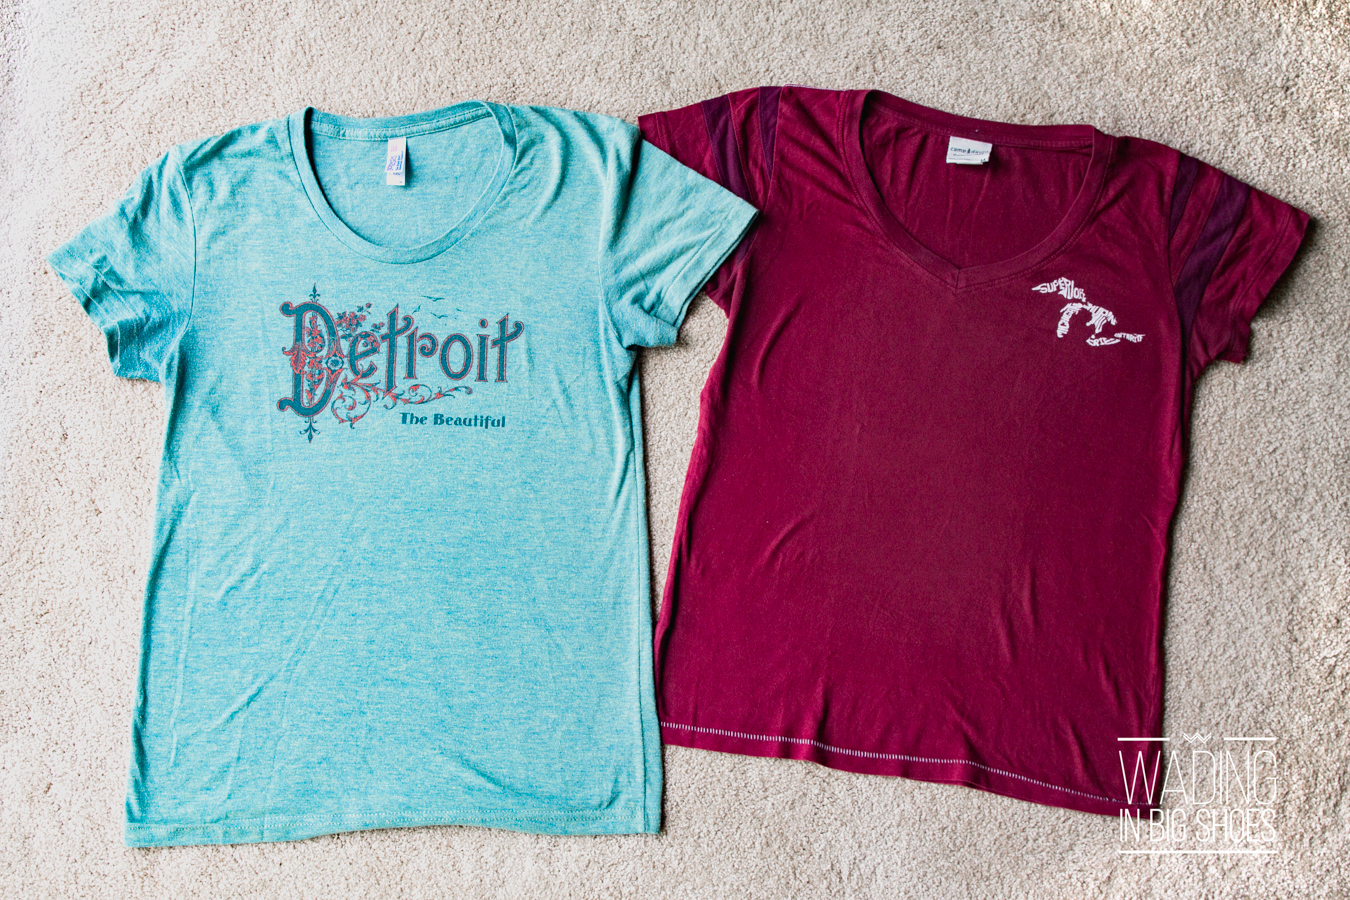 Wading in Big Shoes - Local Fashion Love: My (Mostly Detroit) Michigan T-Shirt Collection